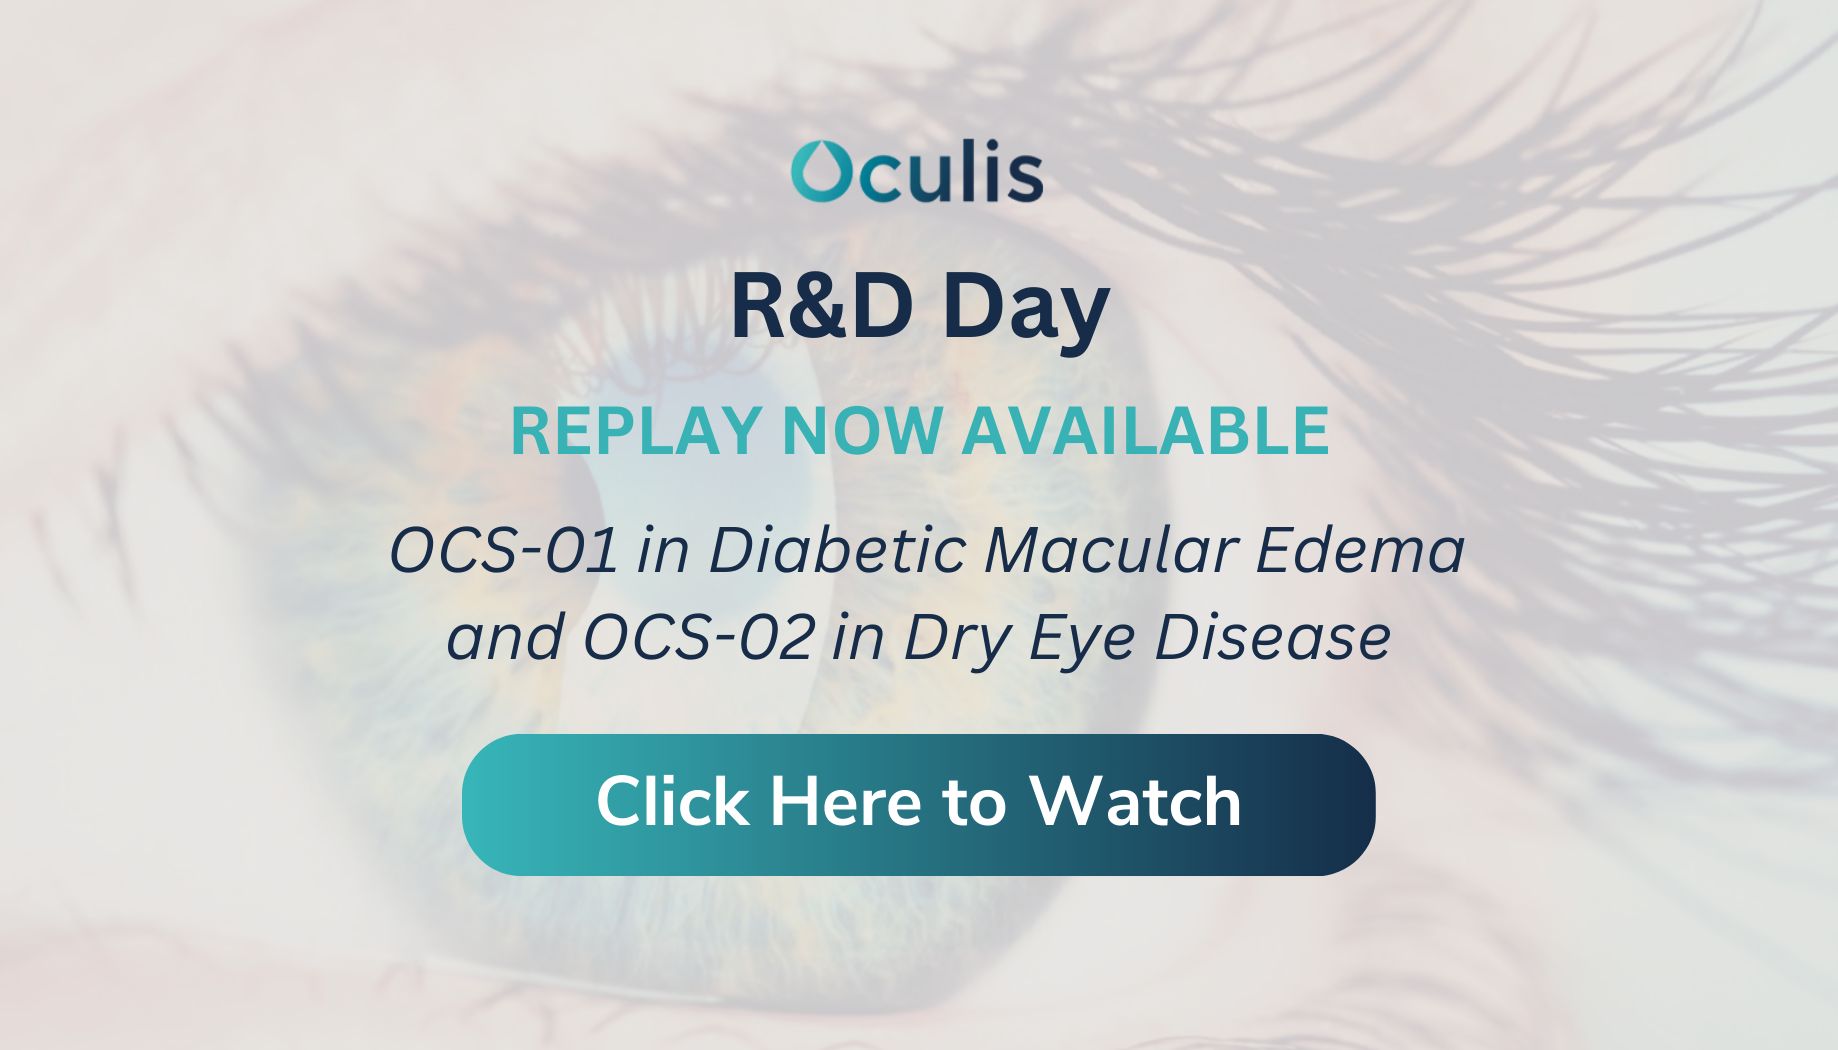 Oculis In-Person R&D Day